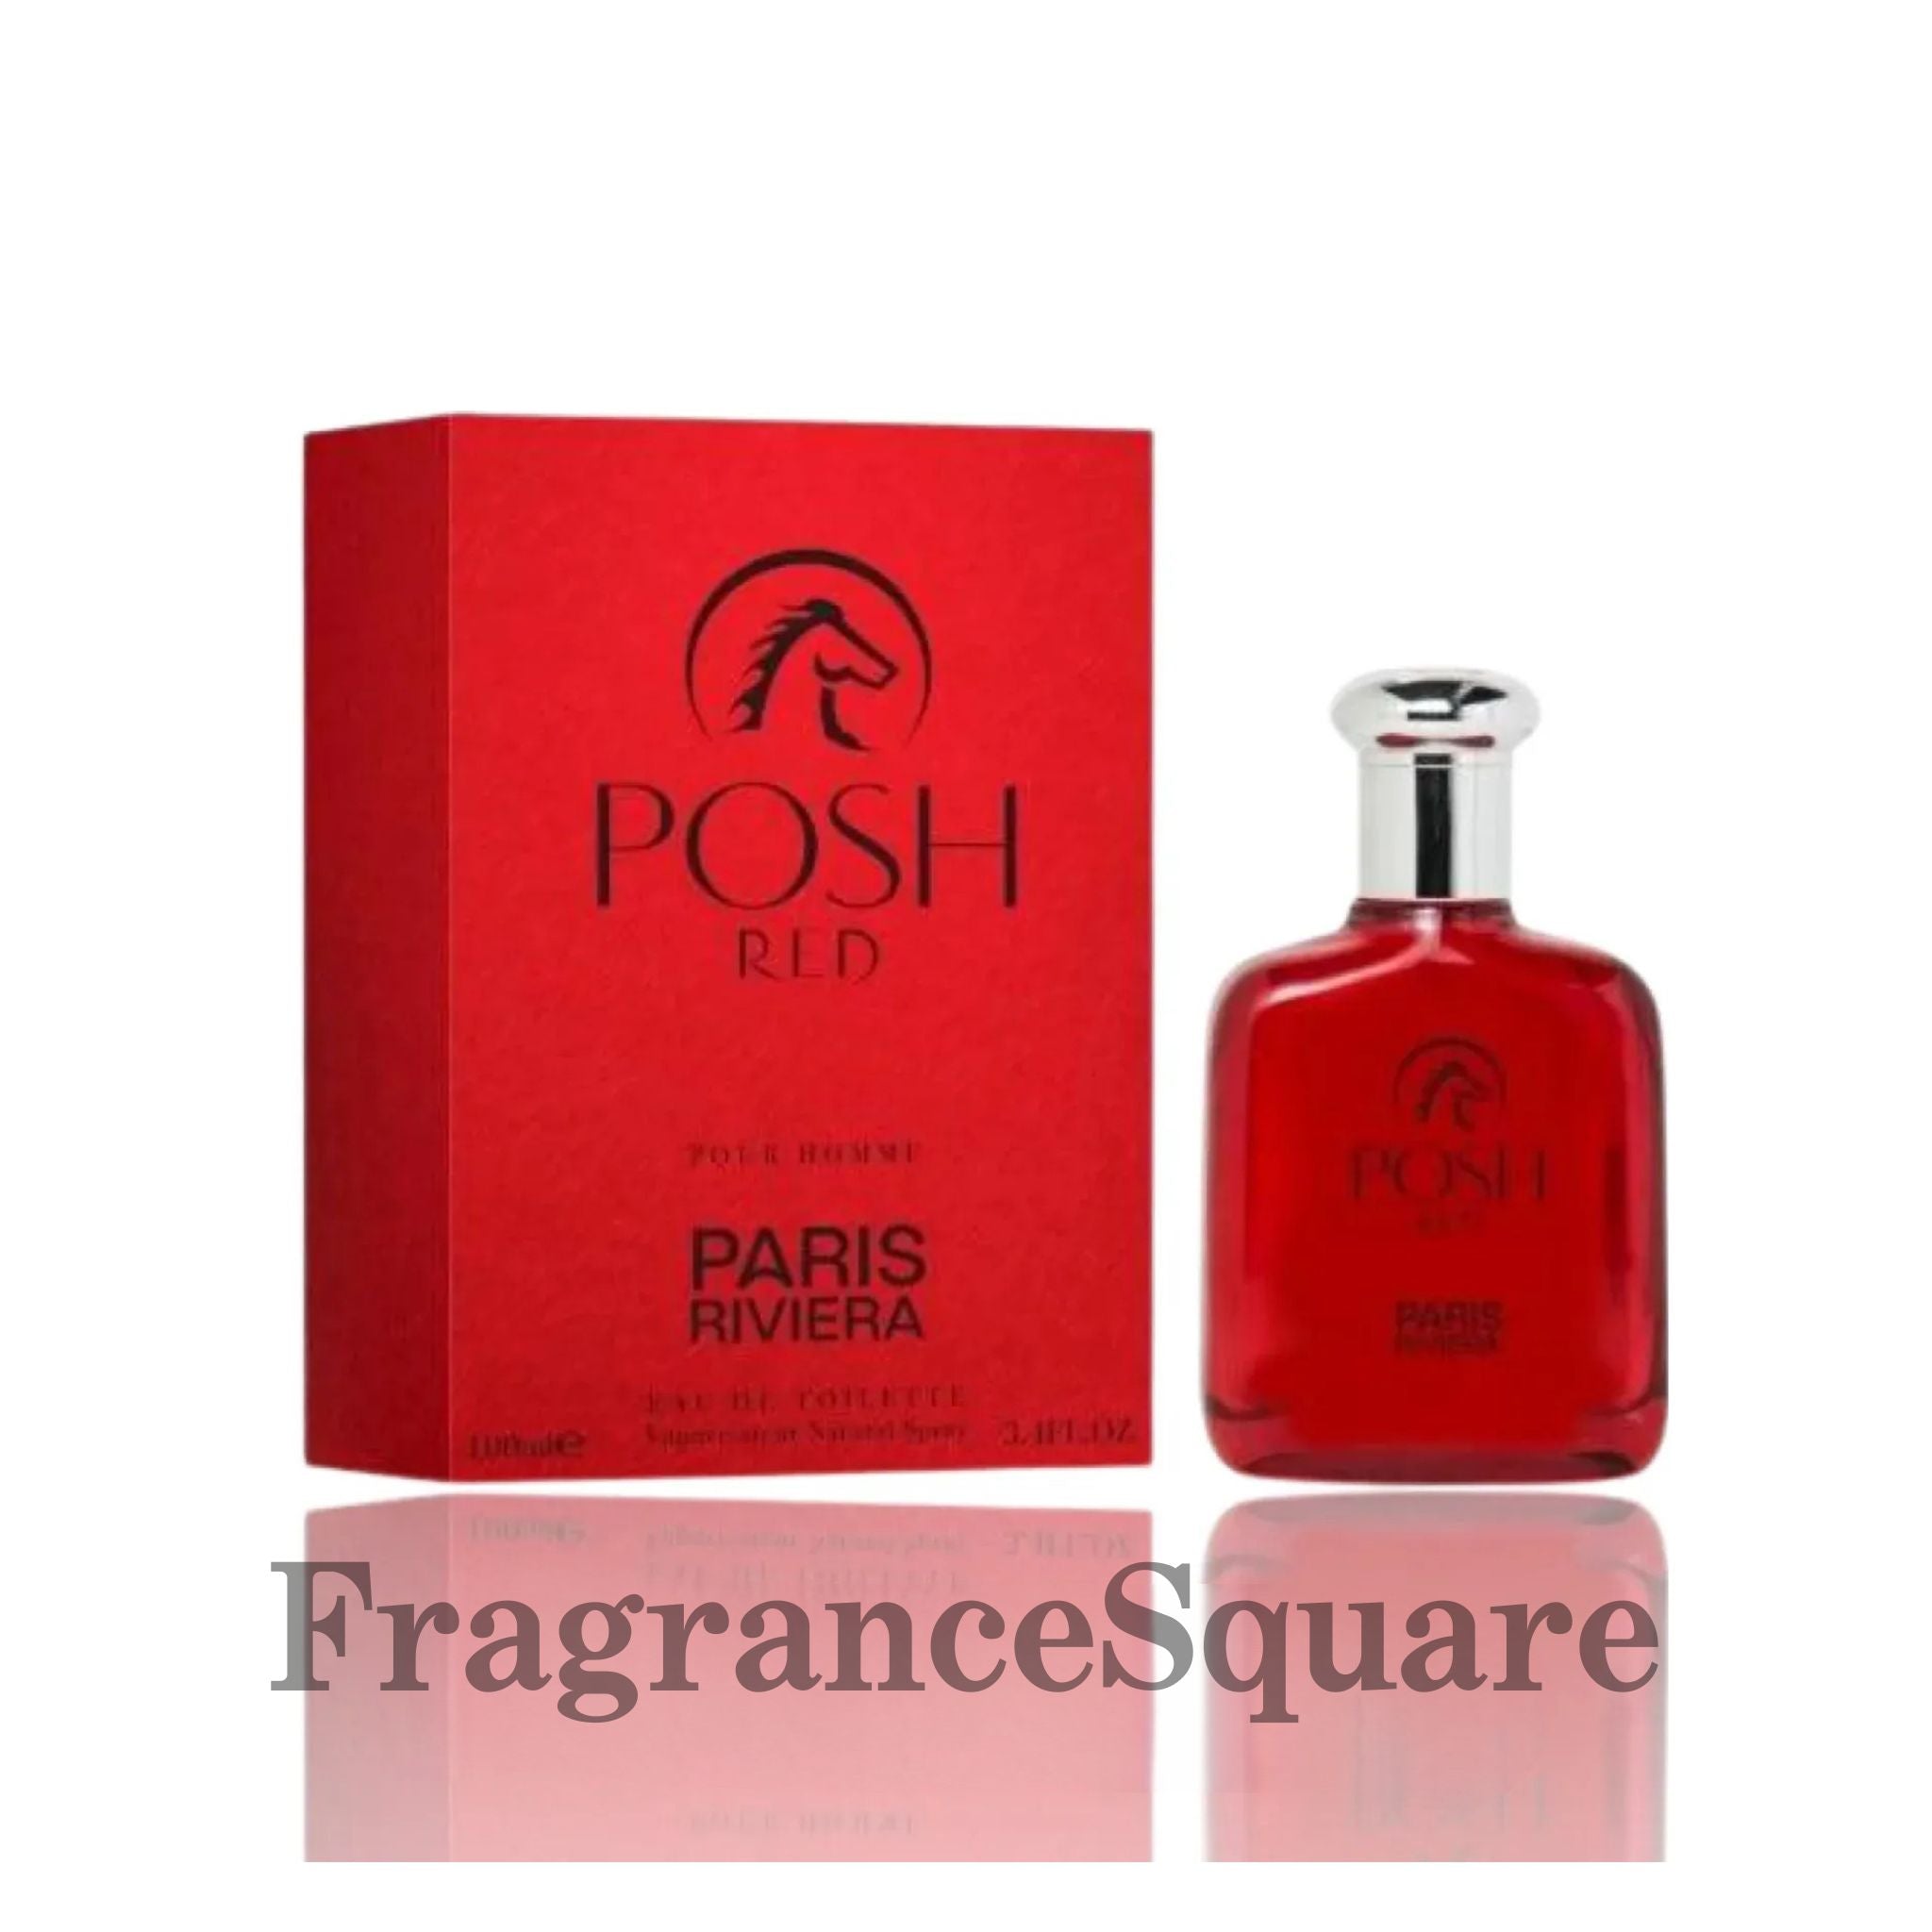 Posh Red | Eau De Toilette 100ml | by Paris Riviera *Inspired By Polo Red*